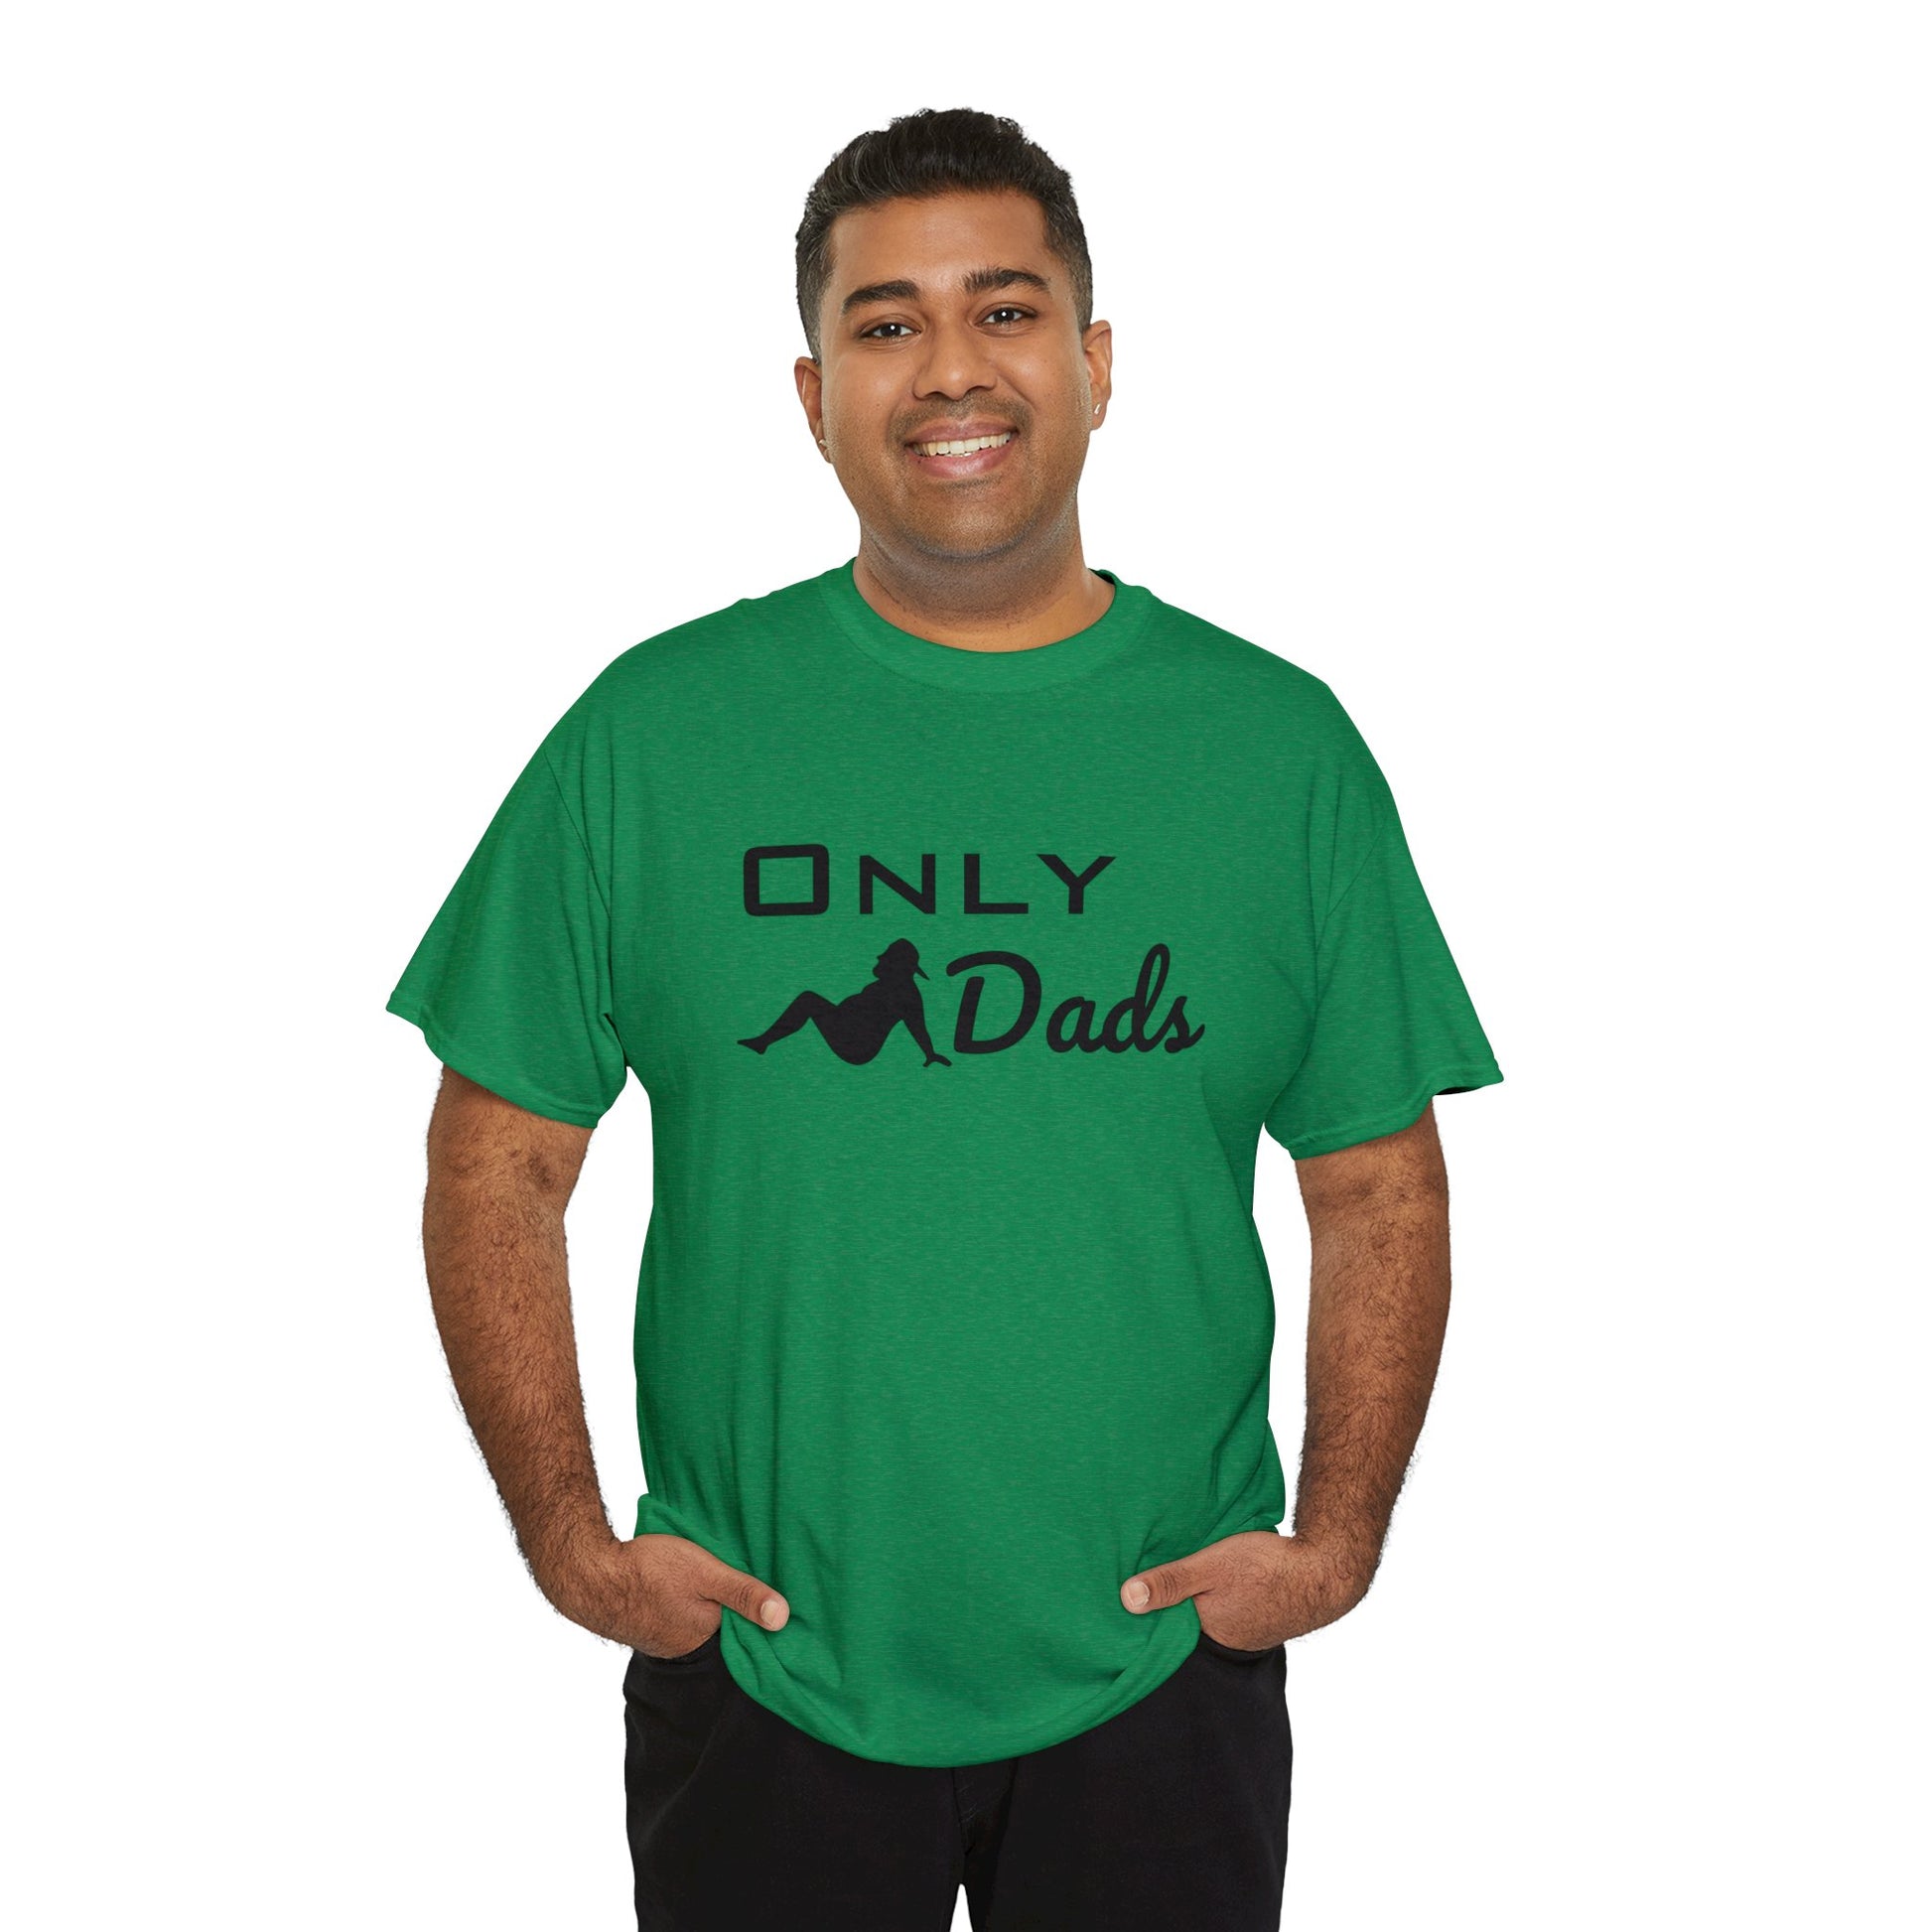 High-quality "Only Dads" cotton tee with tear-away label for dads.